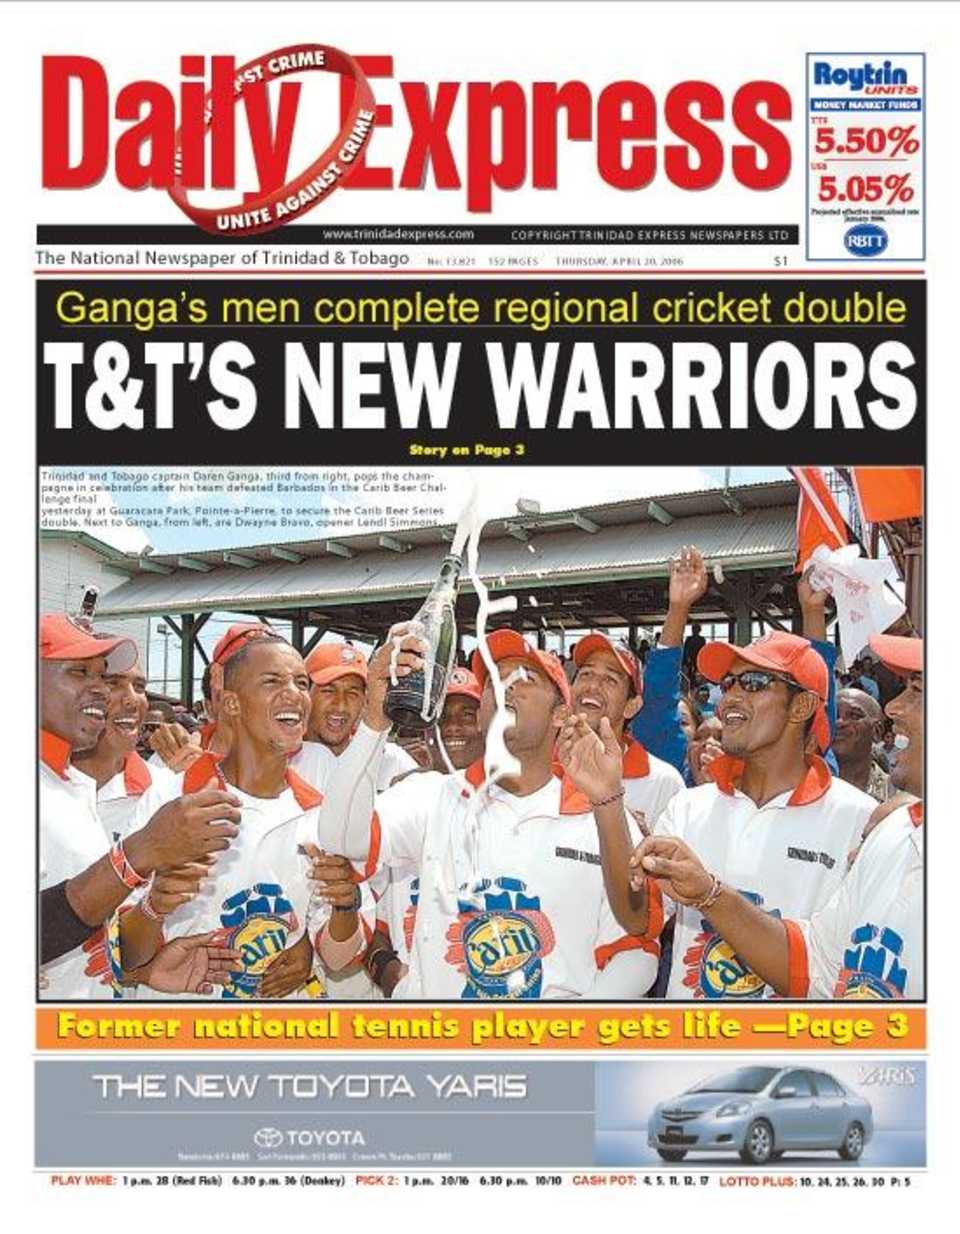 The front page of the <I>Trinidad & Tobago Express</I> celebrates victory